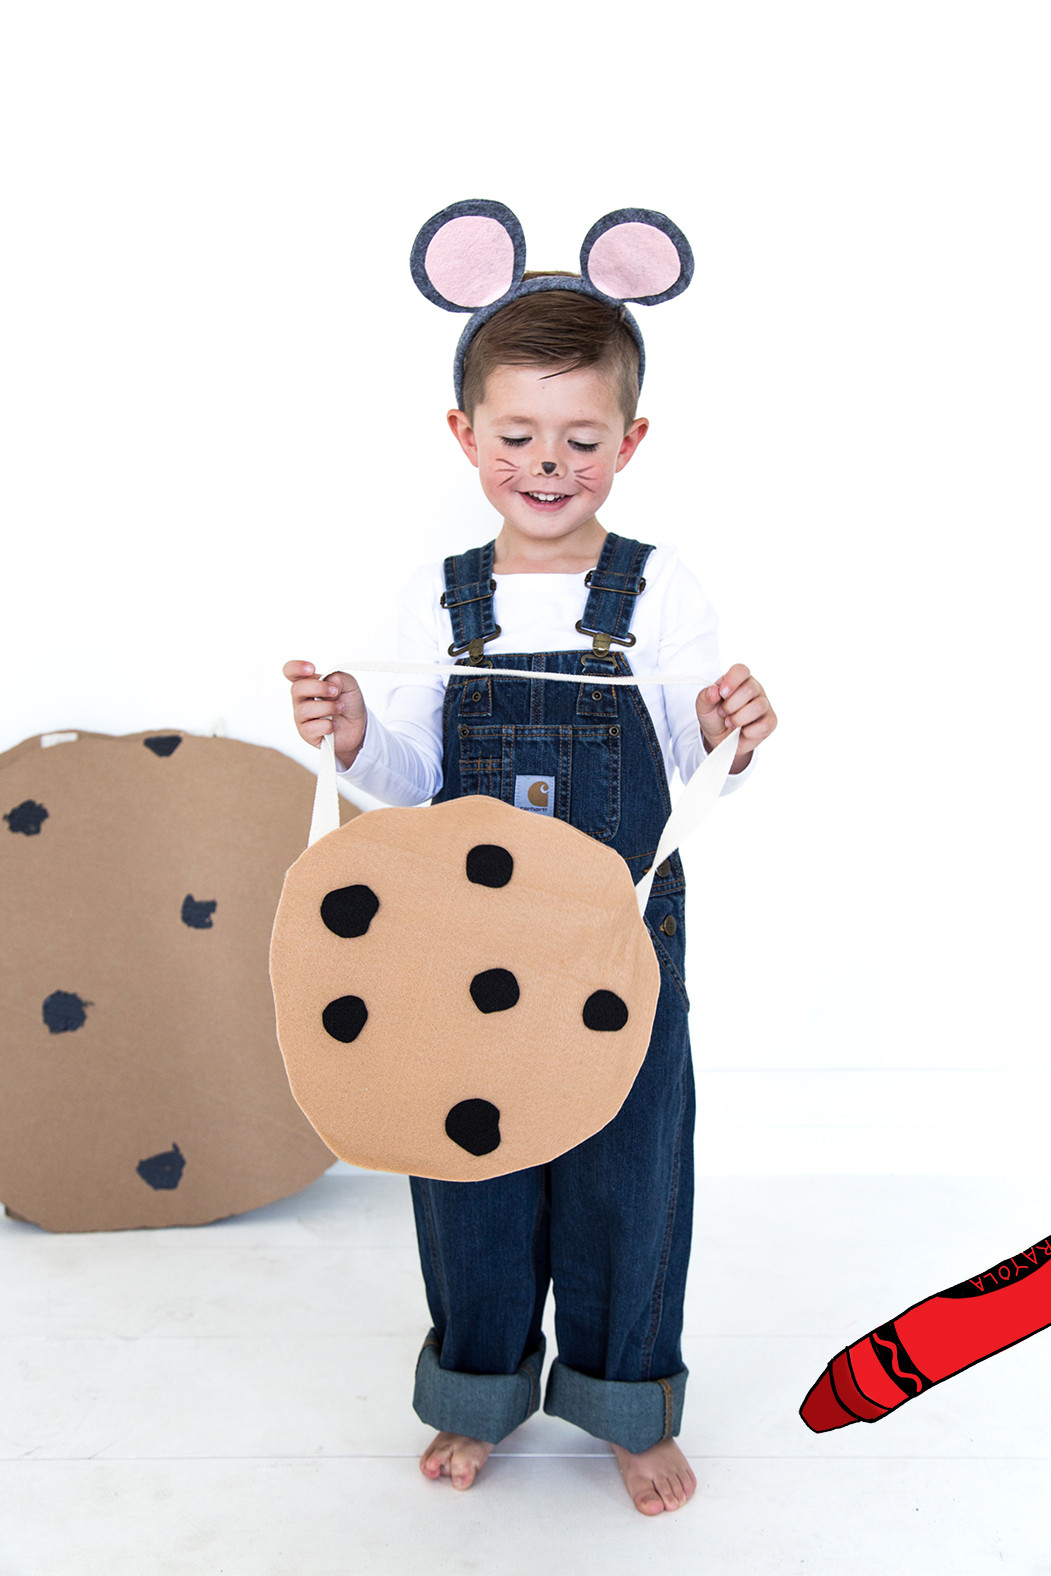 Mouse Costume DIY
 If you give a mouse a cookie costumes